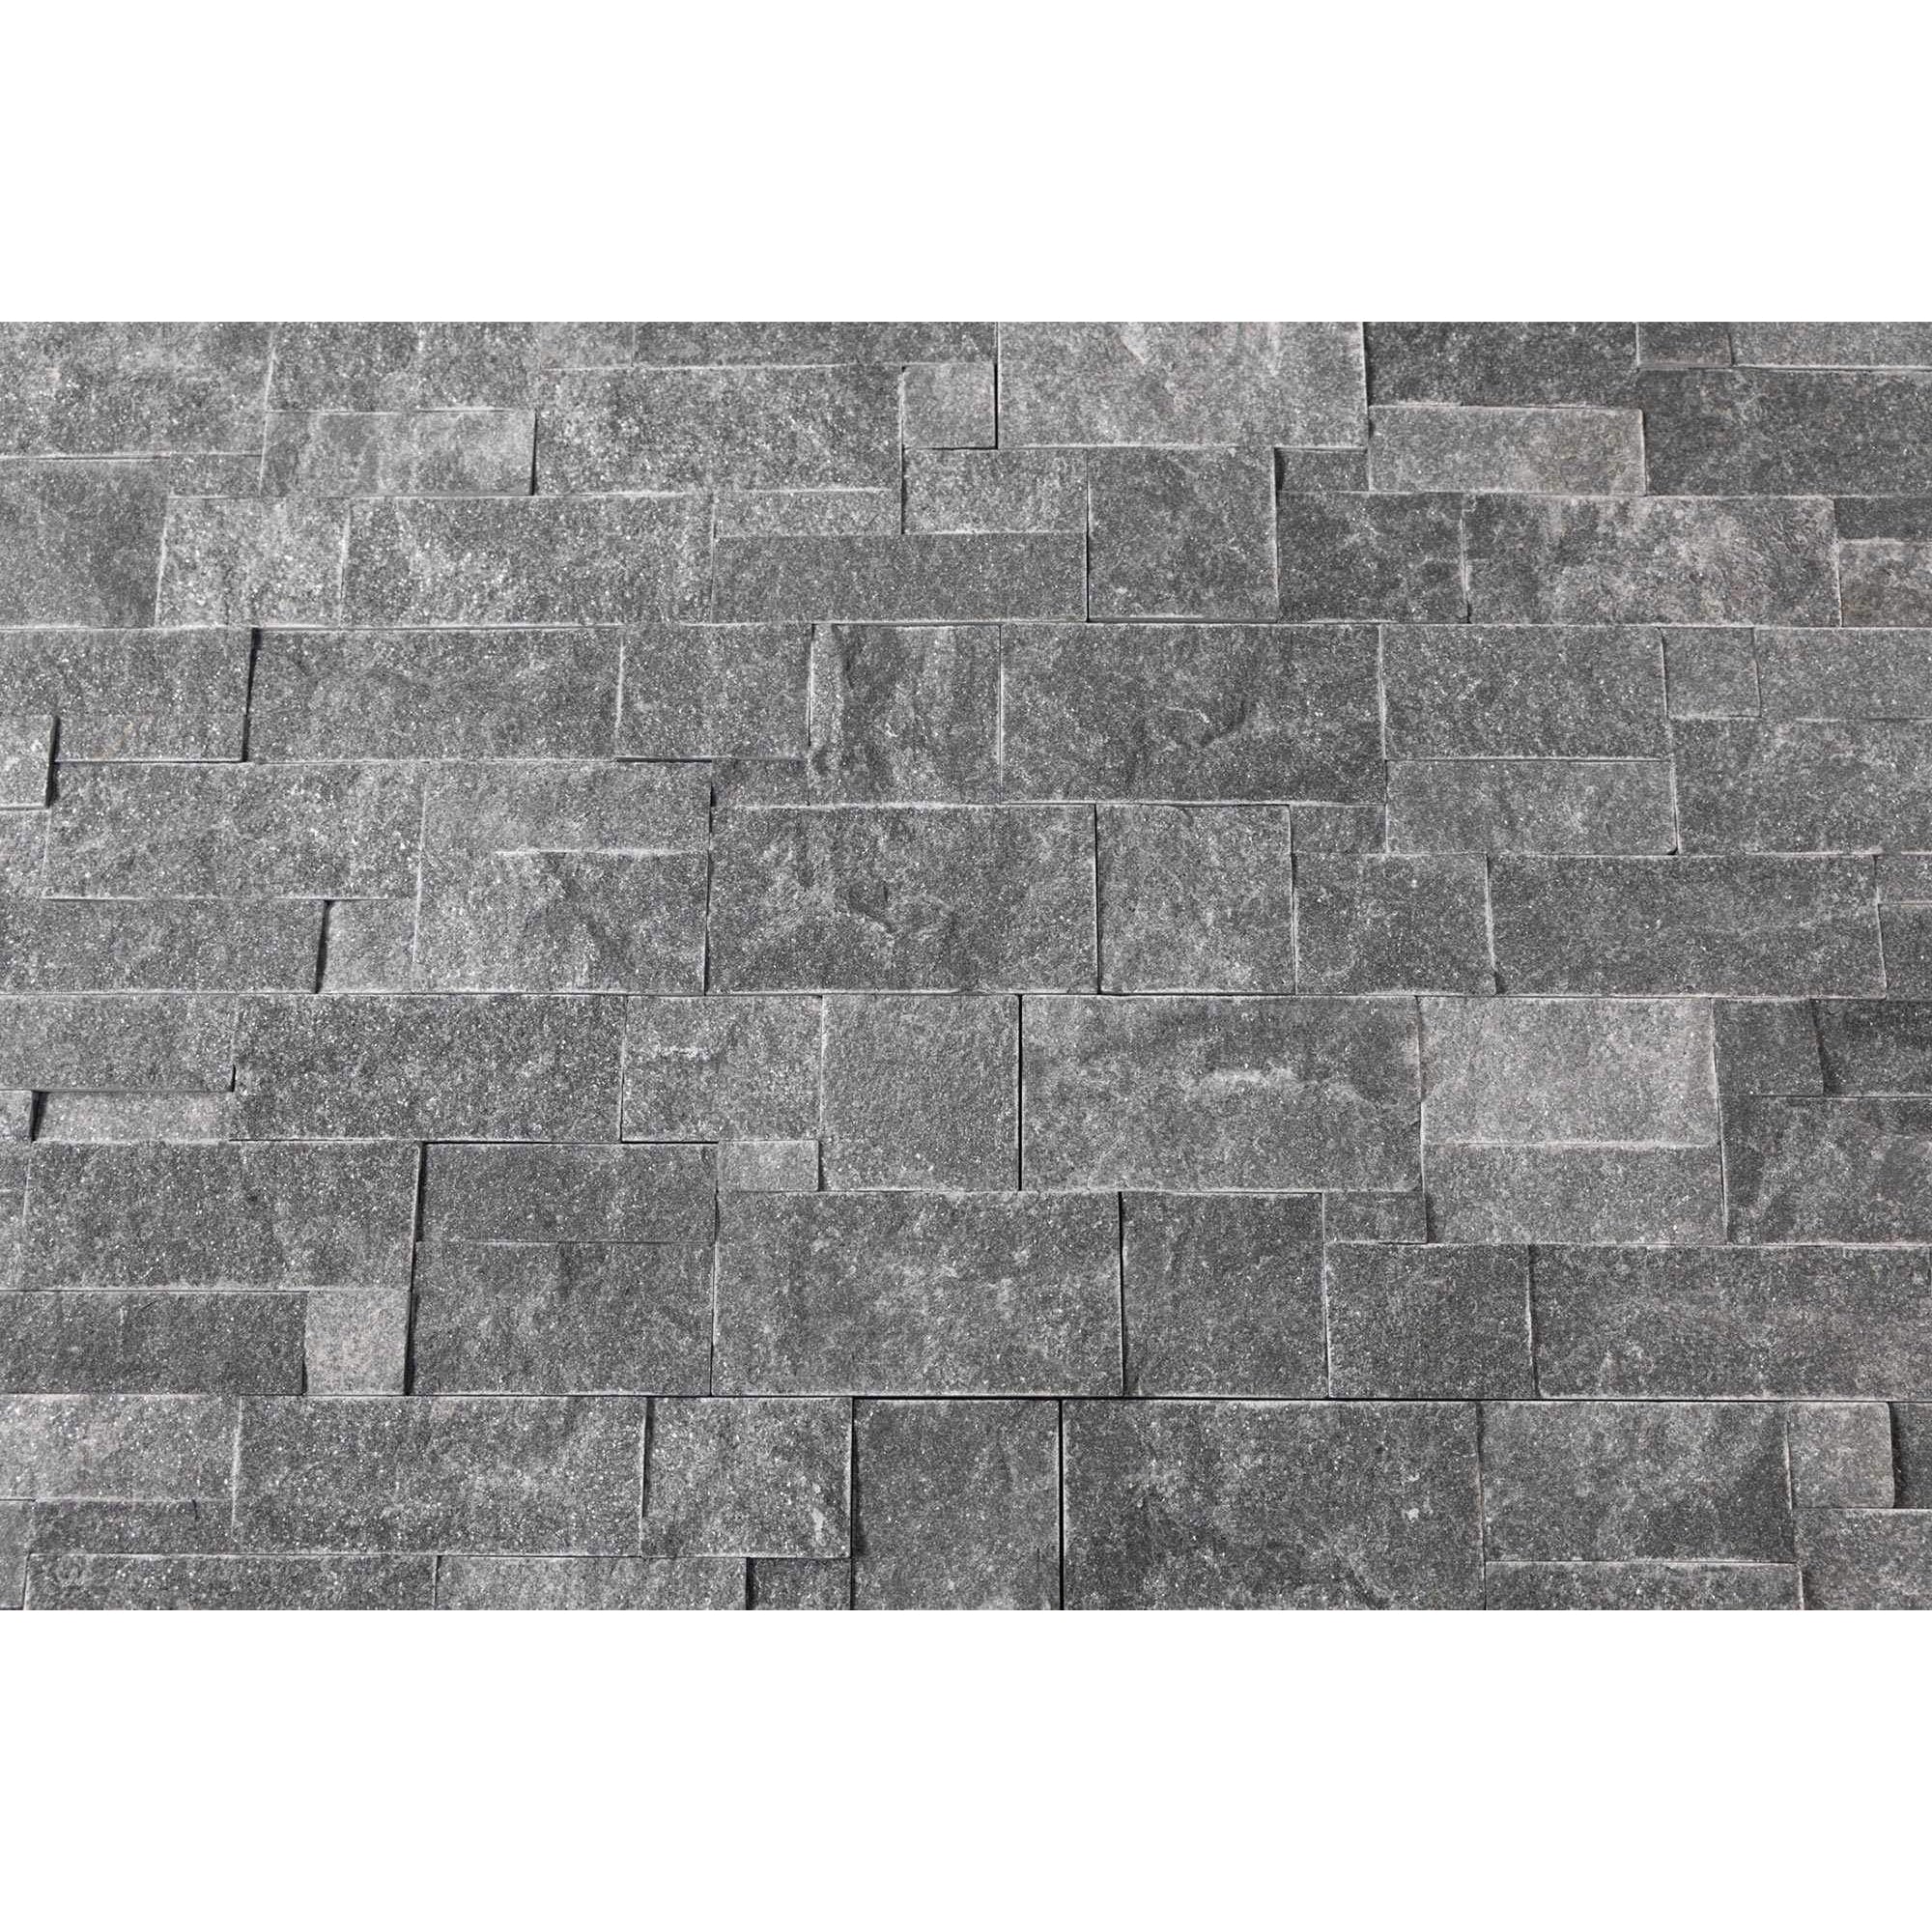 SAMPLE - Natural Stacked Stone Wall Cladding Panels - Galaxy Black Montage